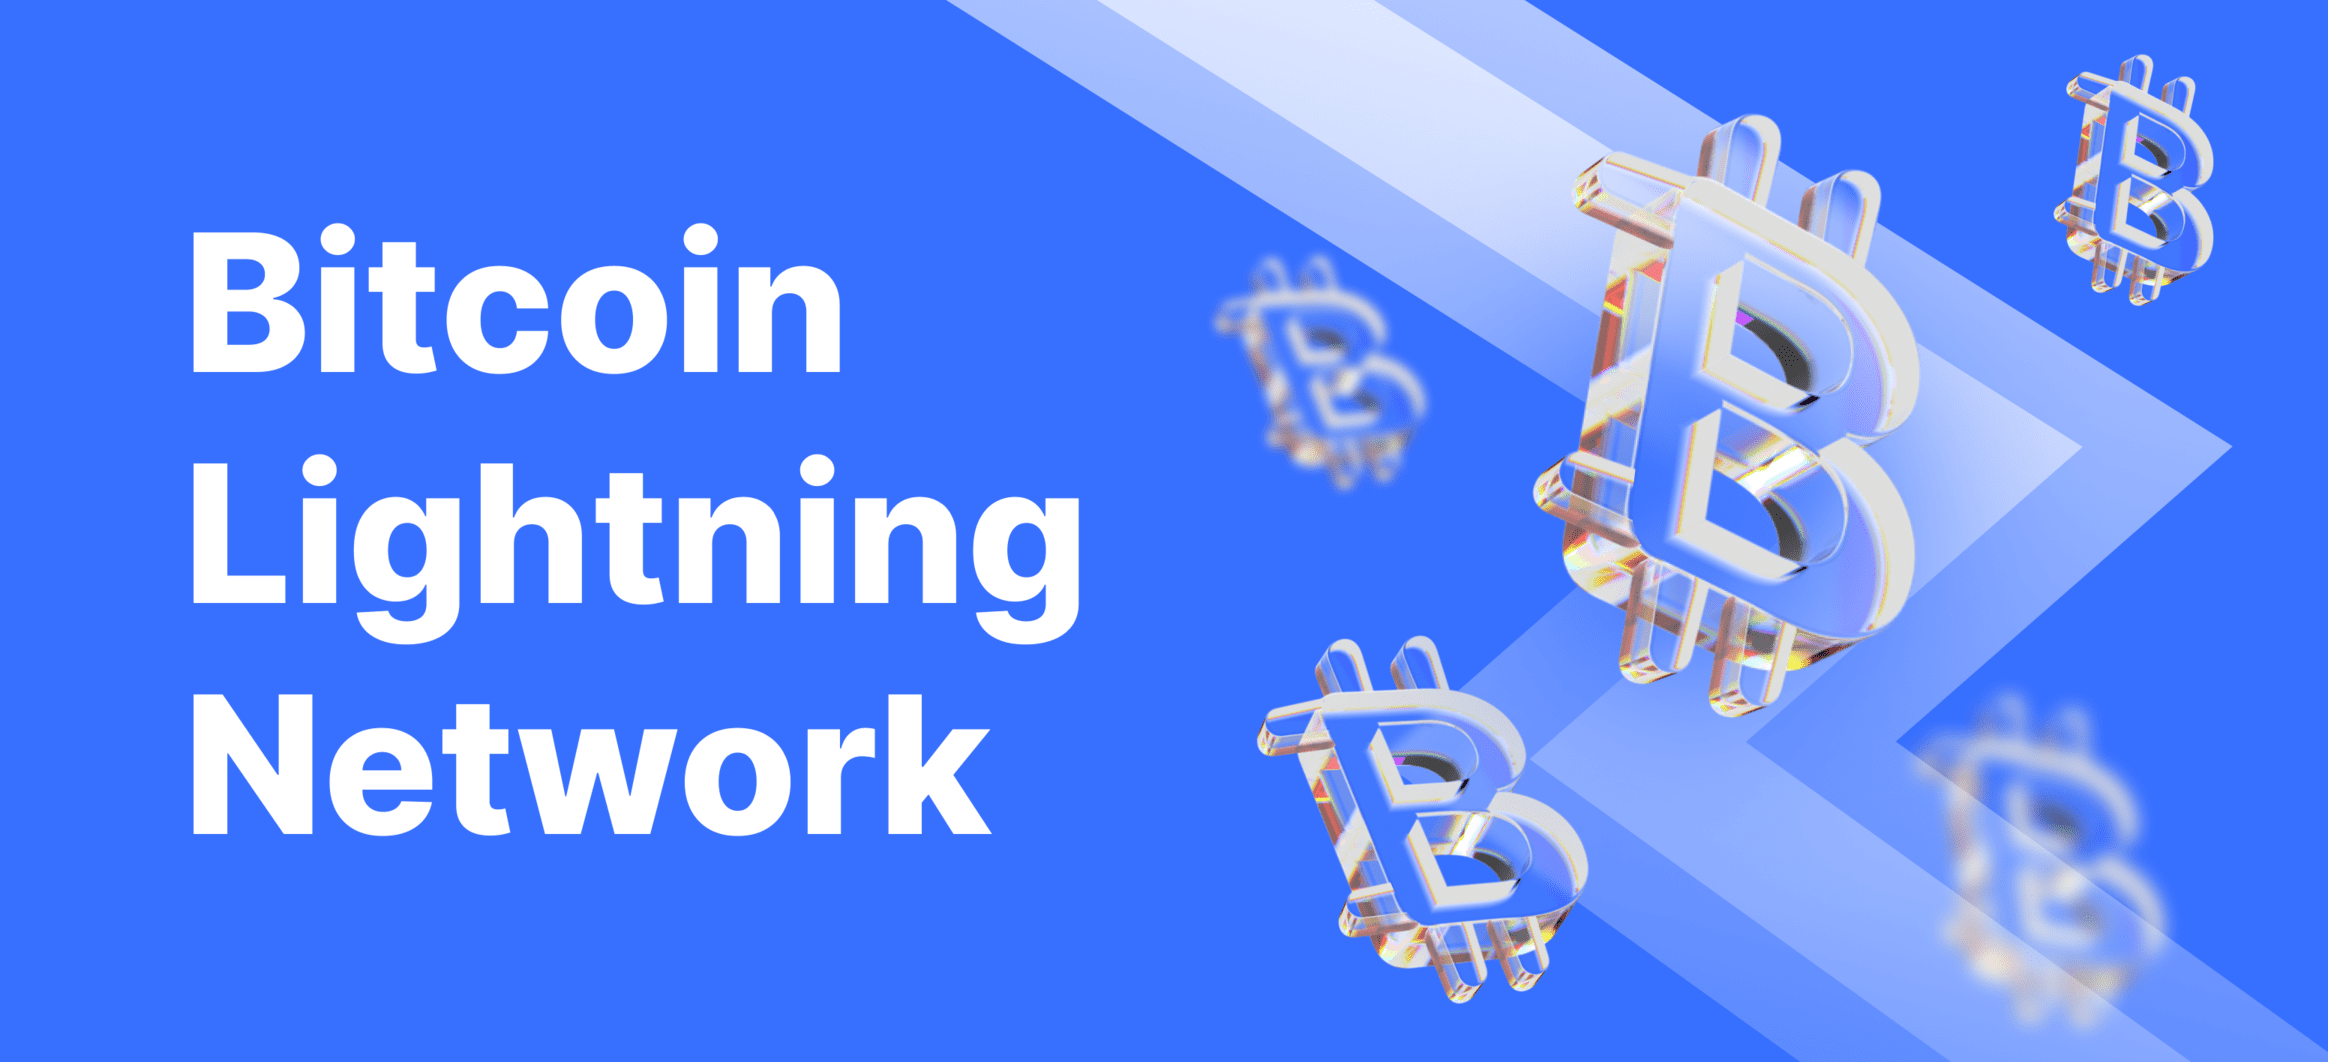 Lightning Network: What It Is and How It Works